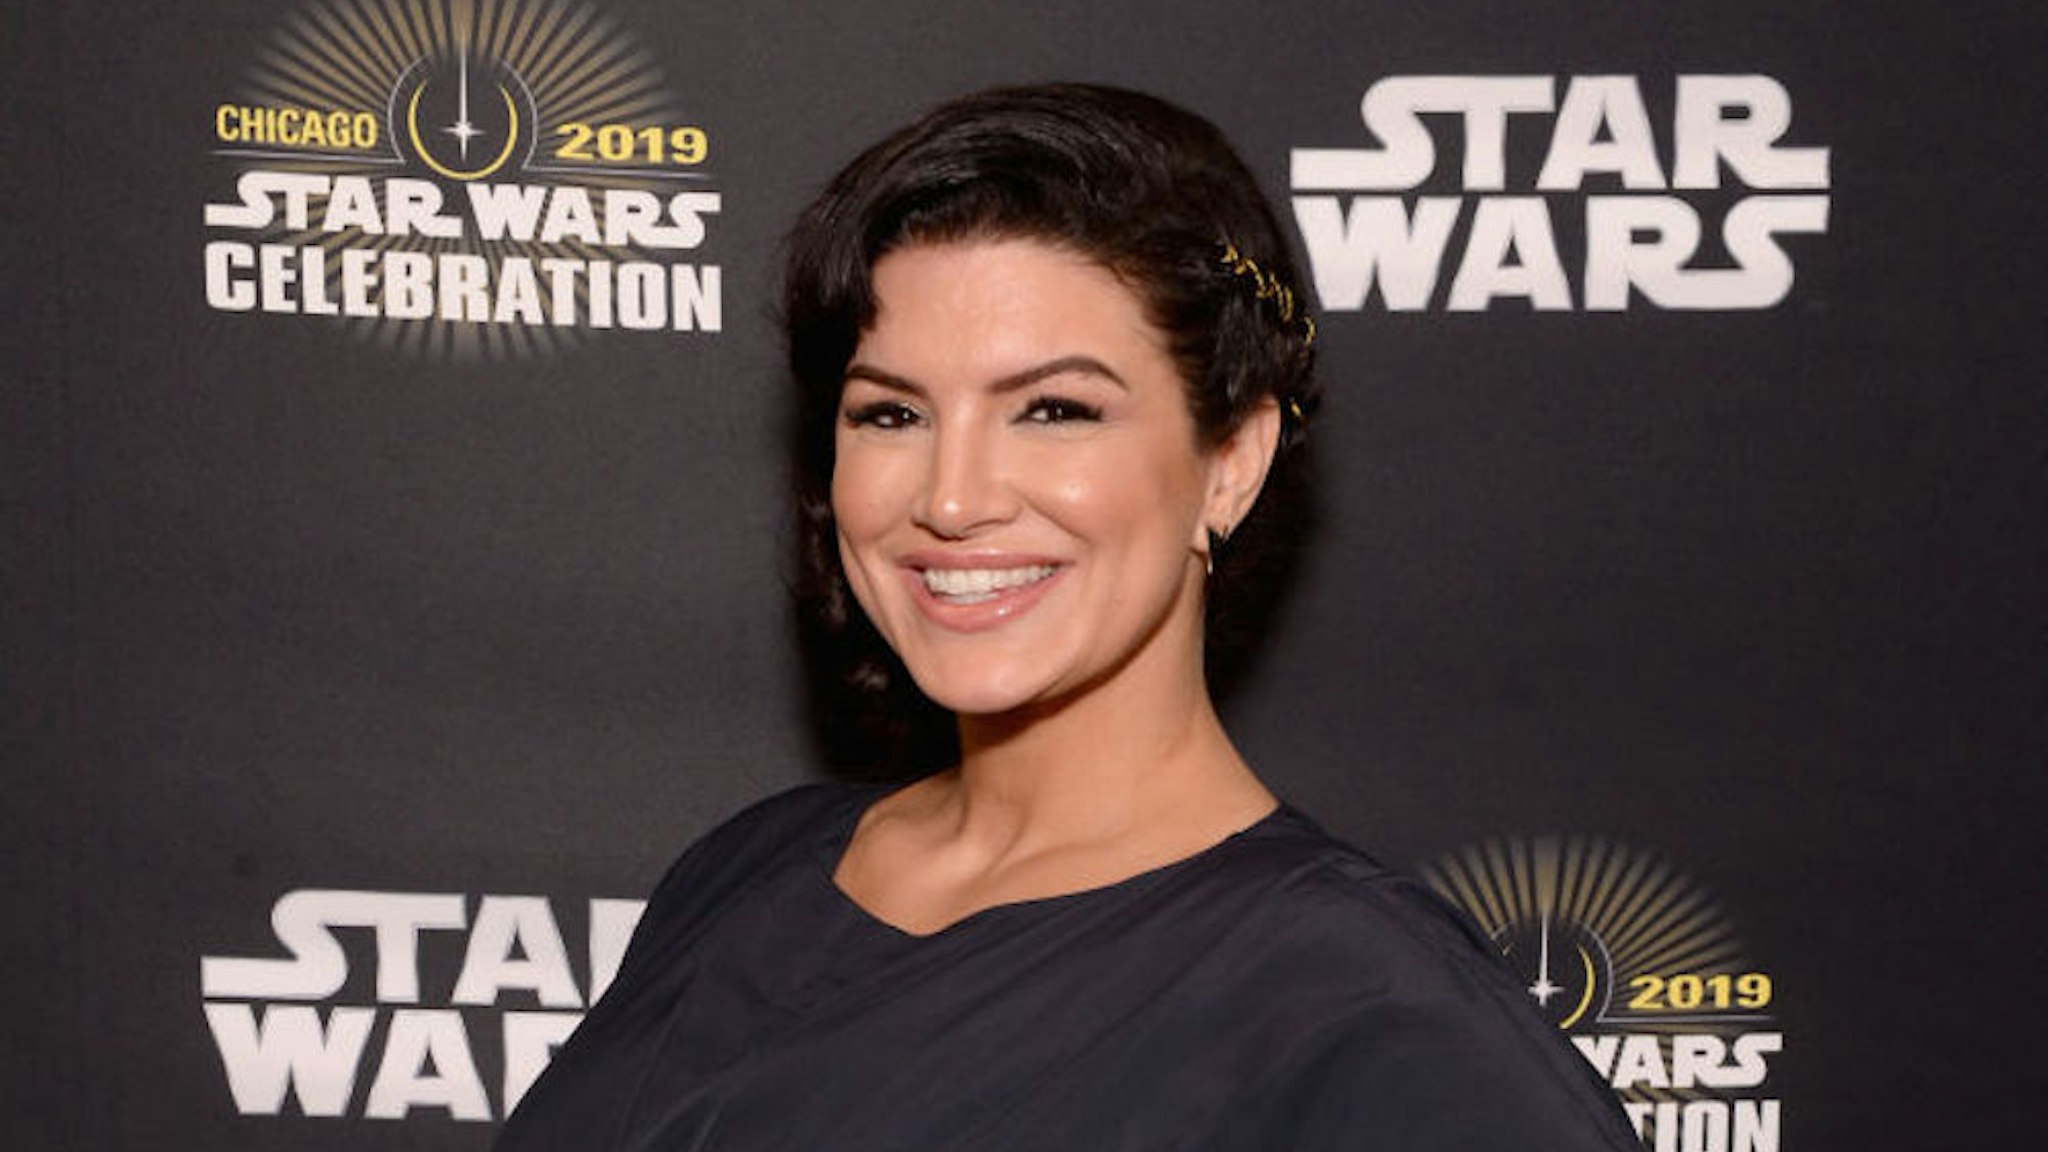 CHICAGO, IL - APRIL 14: Gina Carano (Cara Dune) attends "The Mandalorian" panel at the Star Wars Celebration at McCormick Place Convention Center on April 14, 2019 in Chicago, Illinois. (Photo by Daniel Boczarski/WireImage for Disney)